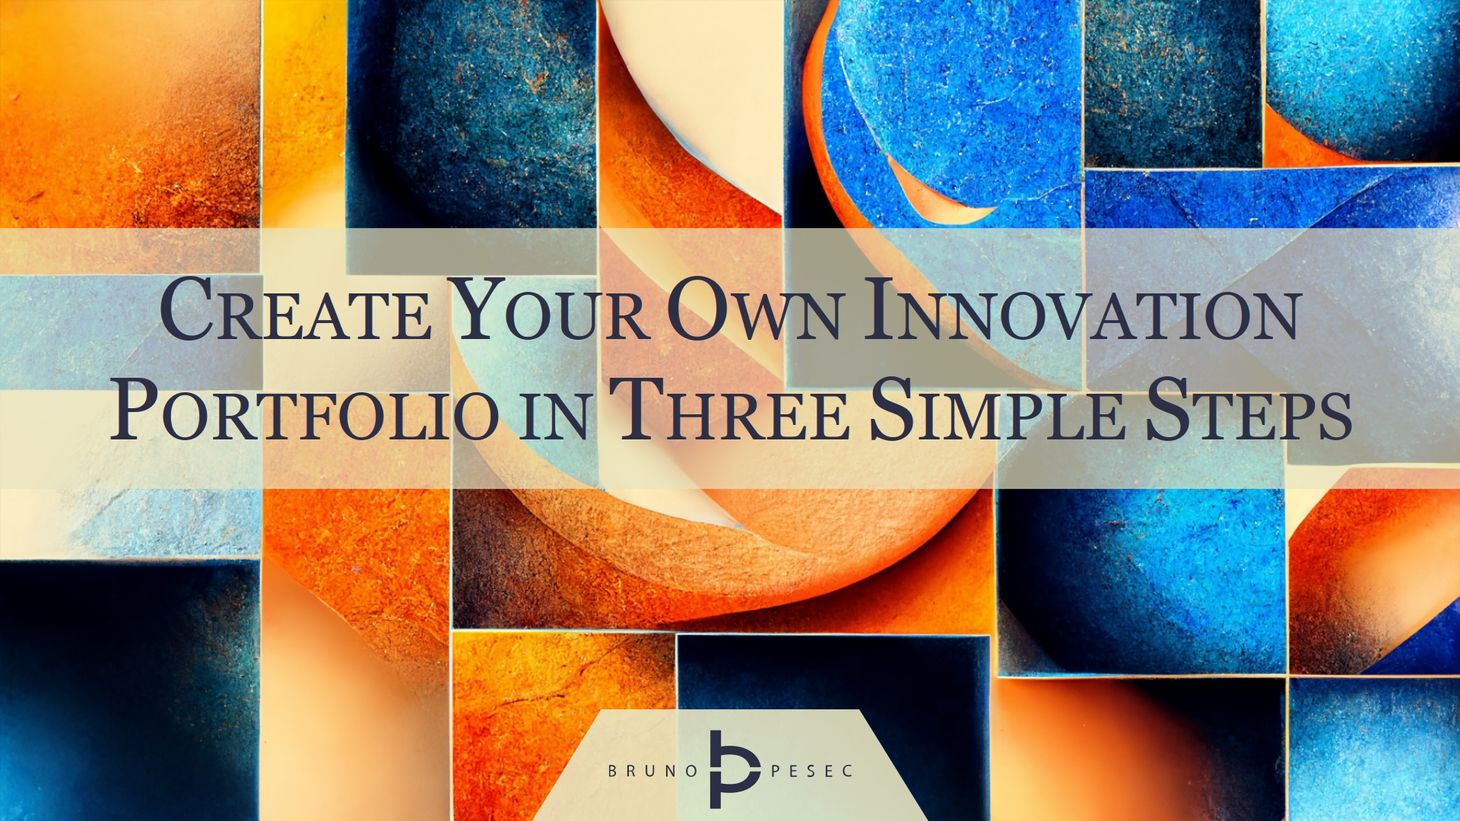 Create your own innovation portfolio in three simple steps